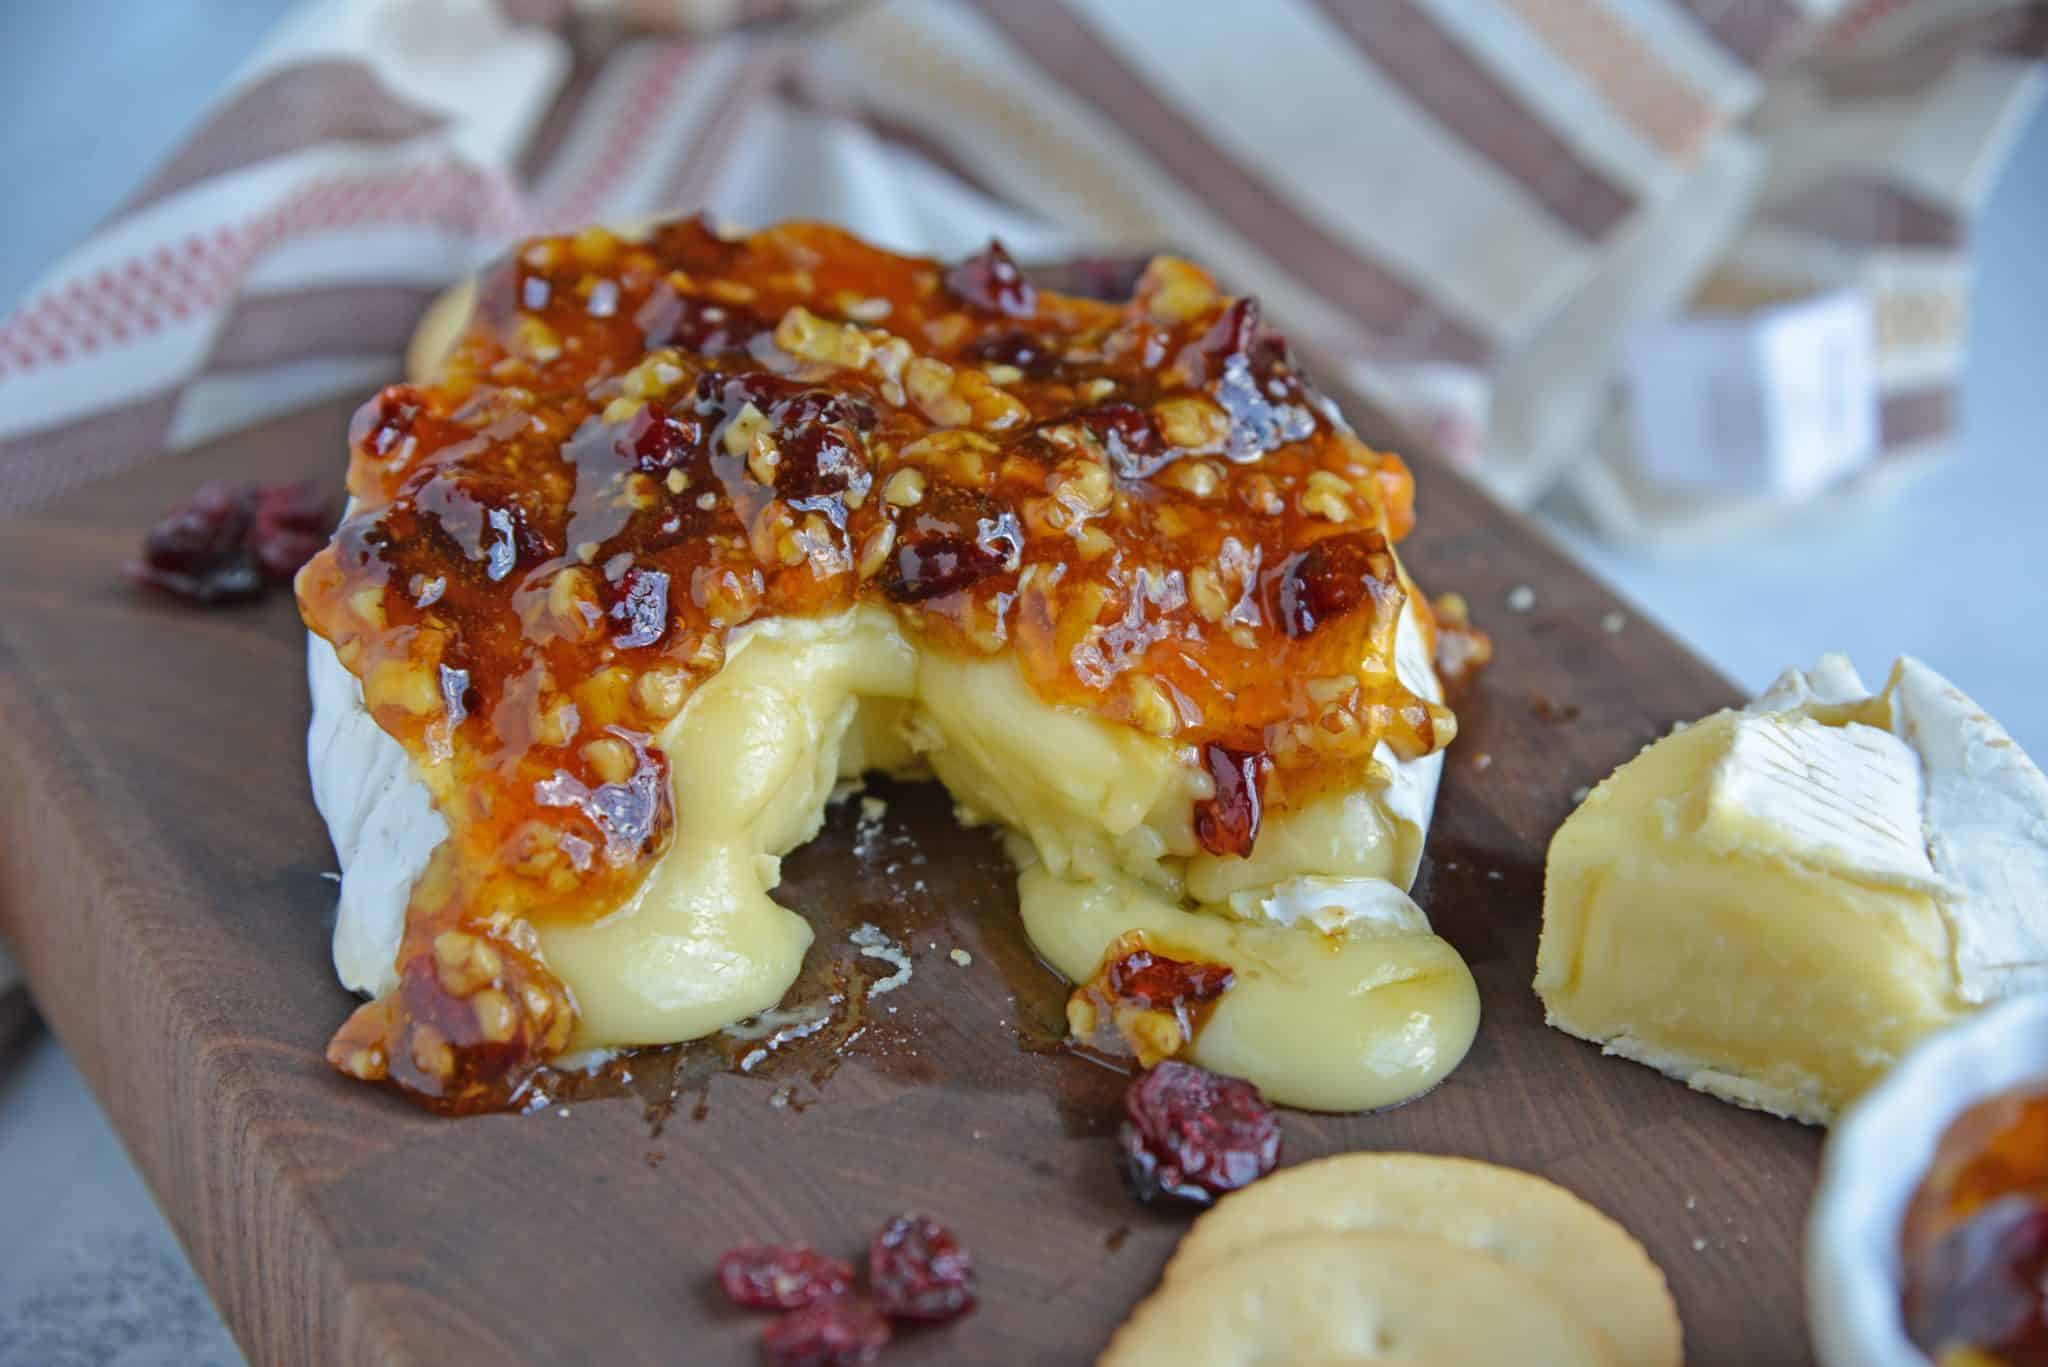 Apricot Cranberry Baked Brie is the ultimate appetizer. This baked brie appetizer will be perfect for any occasion. #bakedbrierecipe #bakedbrieappetizer www.savoryexperiments.com